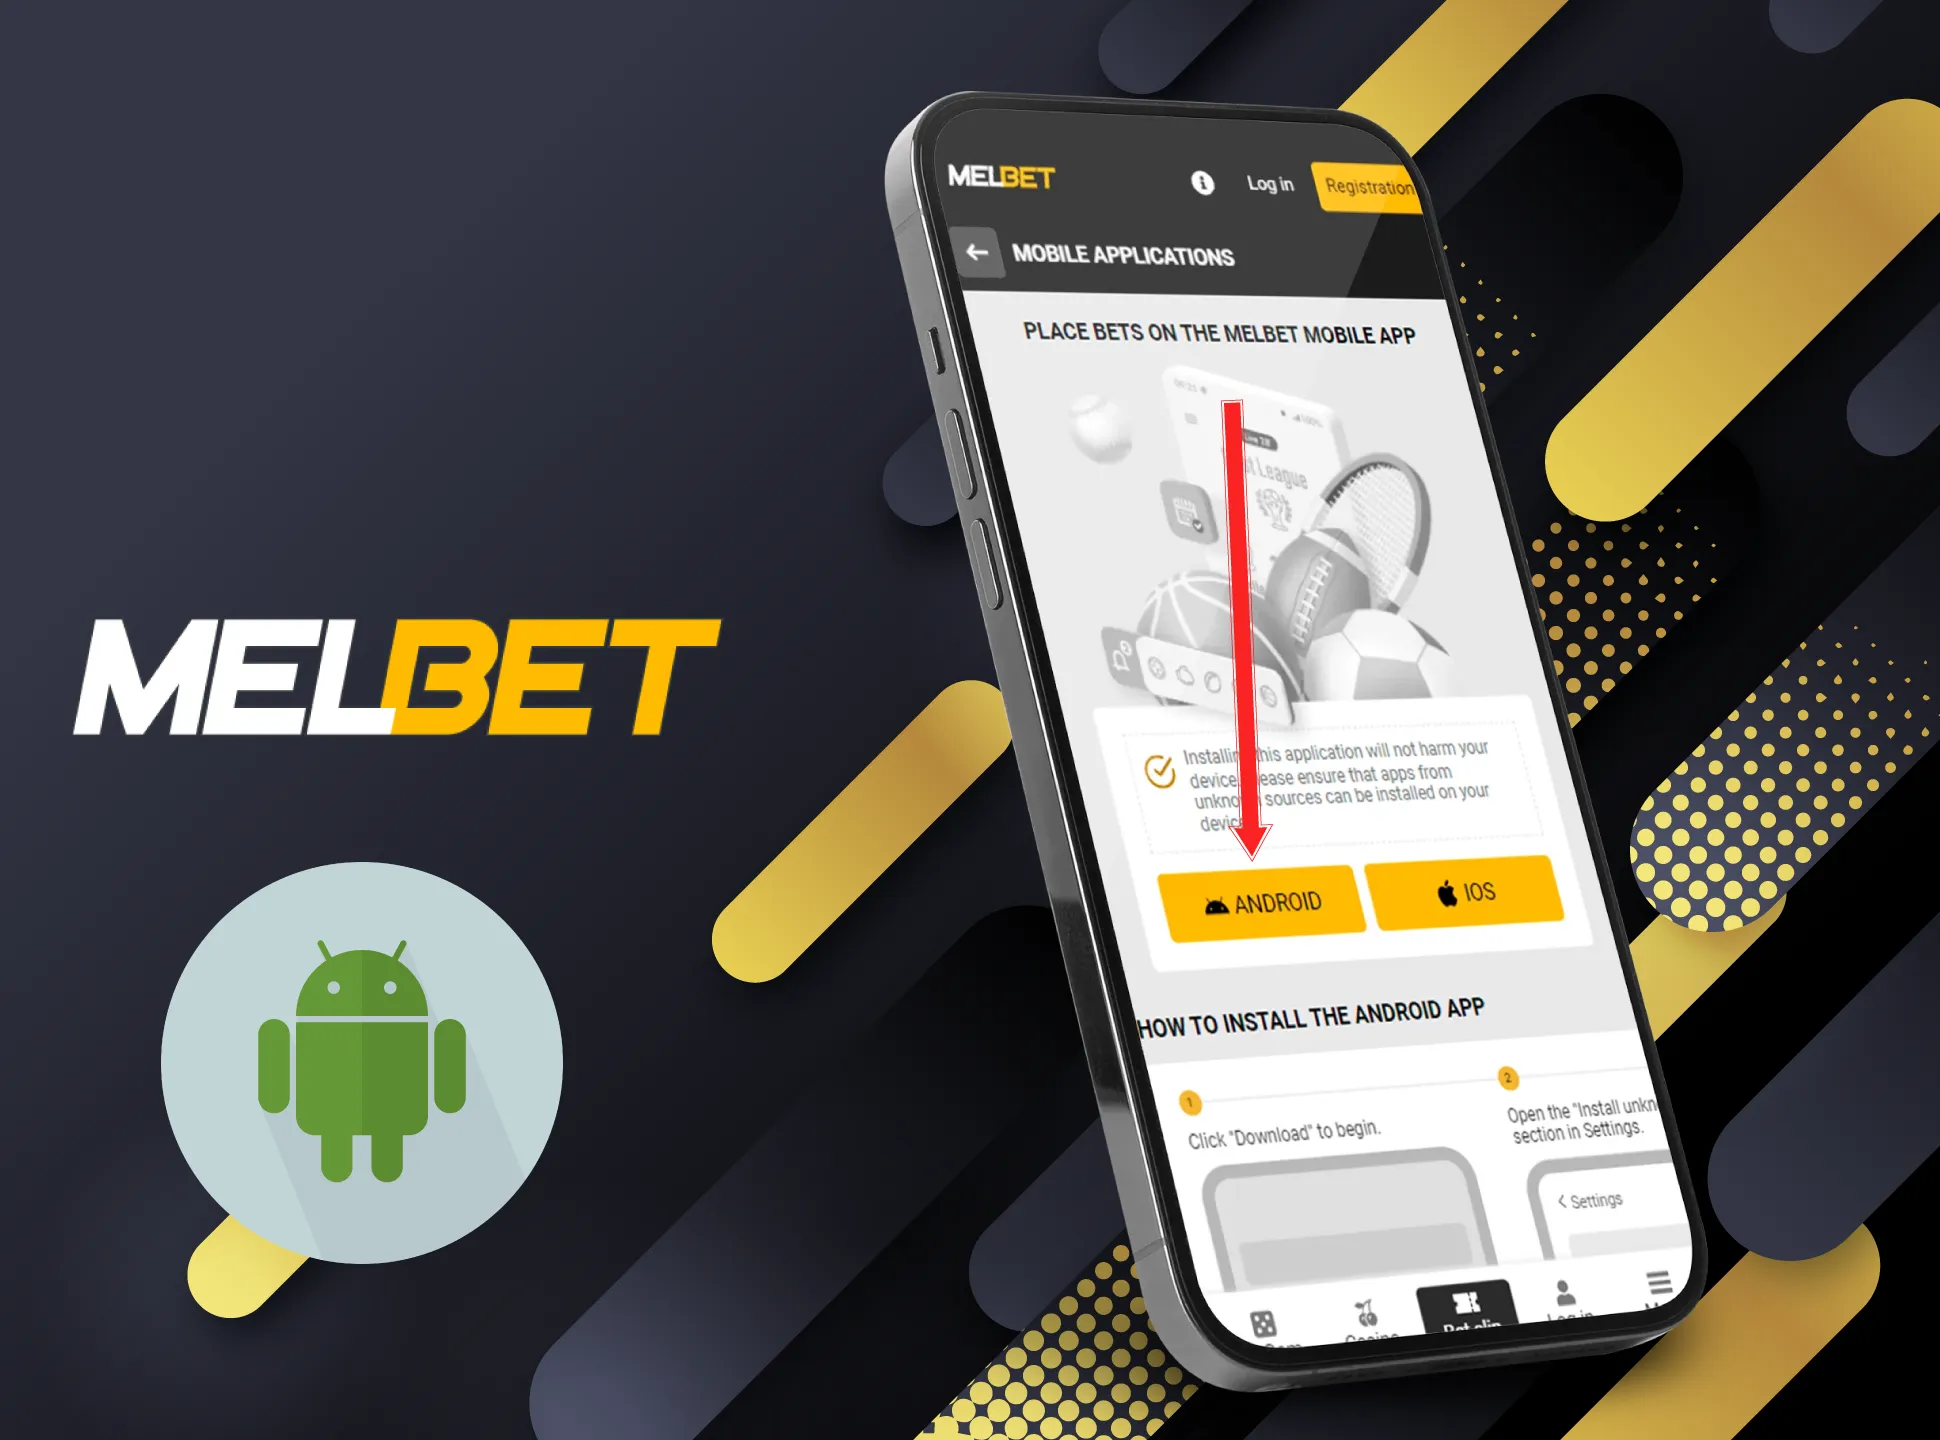 Download the Melbet app form the official website.